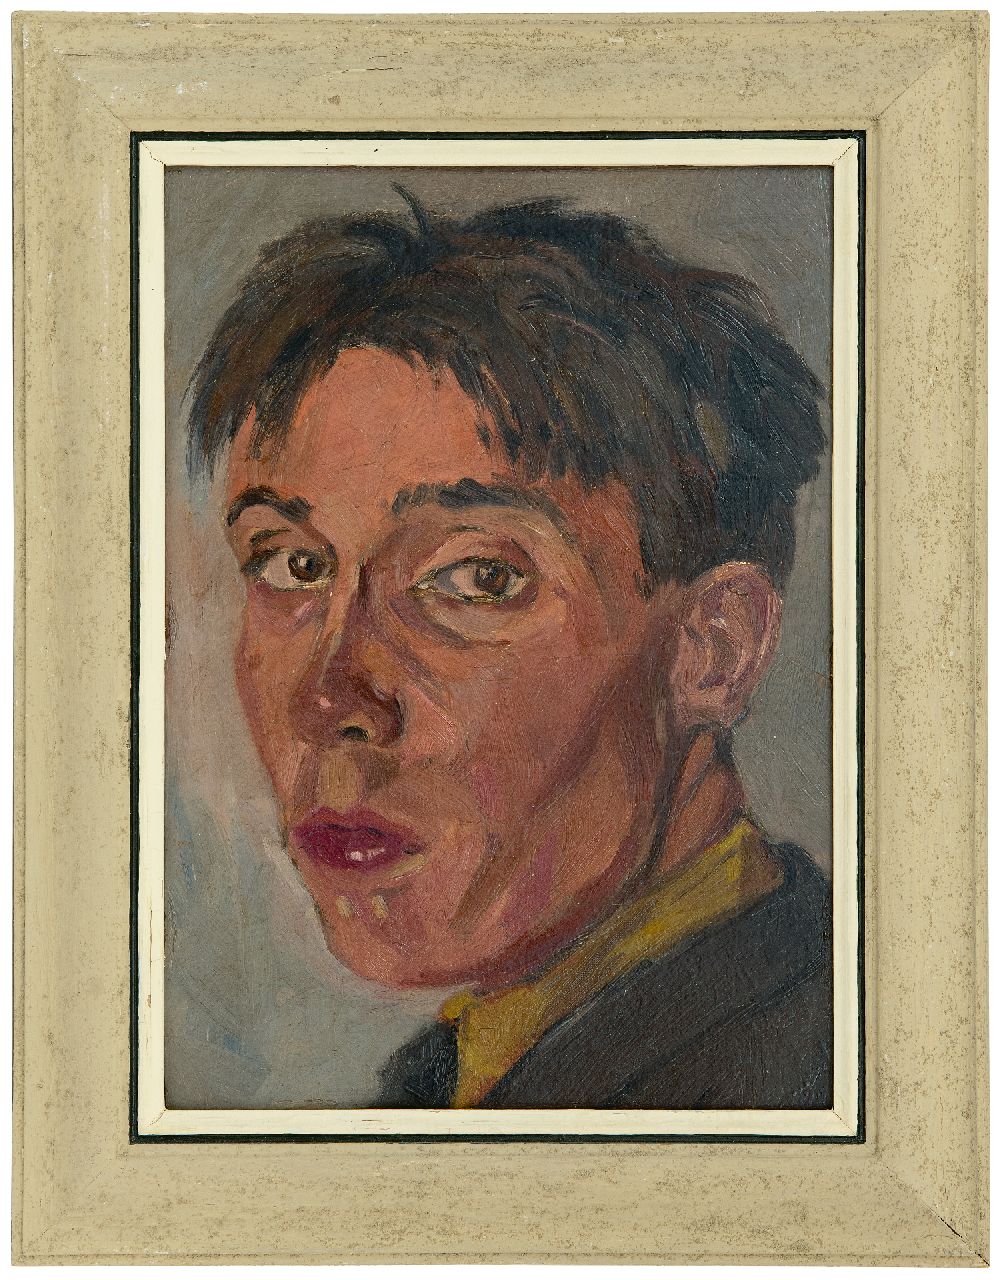 Ket D.H.  | Dirk Hendrik 'Dick' Ket | Paintings offered for sale | Self-portrait, turned to the left, oil on board 33.5 x 24.0 cm, painted ca. 1924